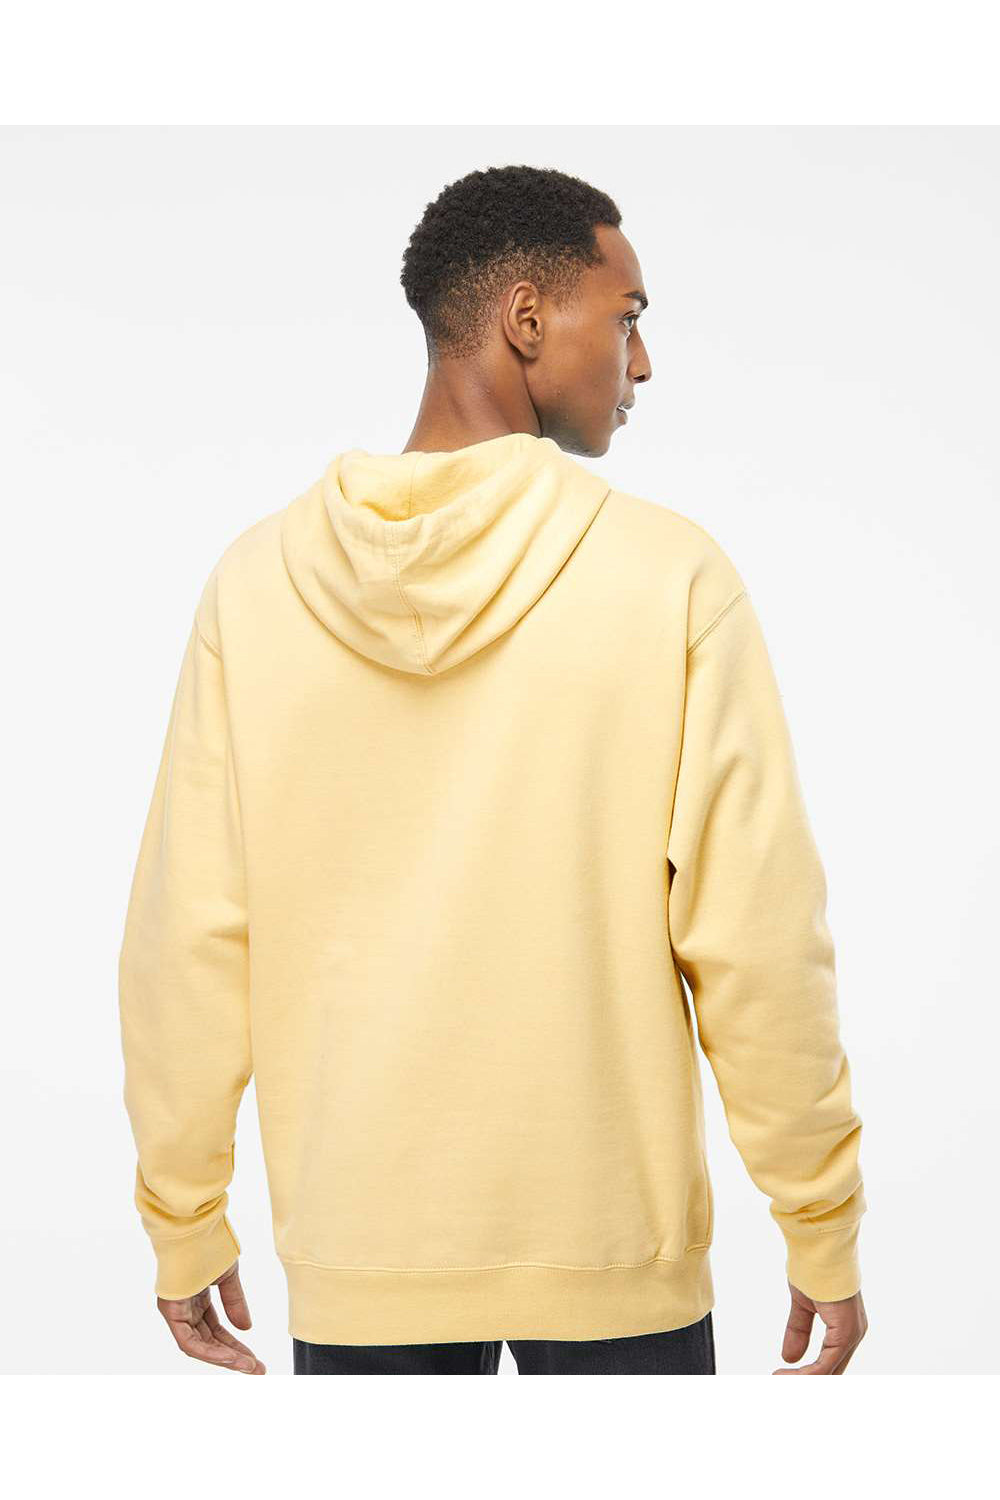 Independent Trading Co. SS4500 Mens Hooded Sweatshirt Hoodie Light Yellow Model Back